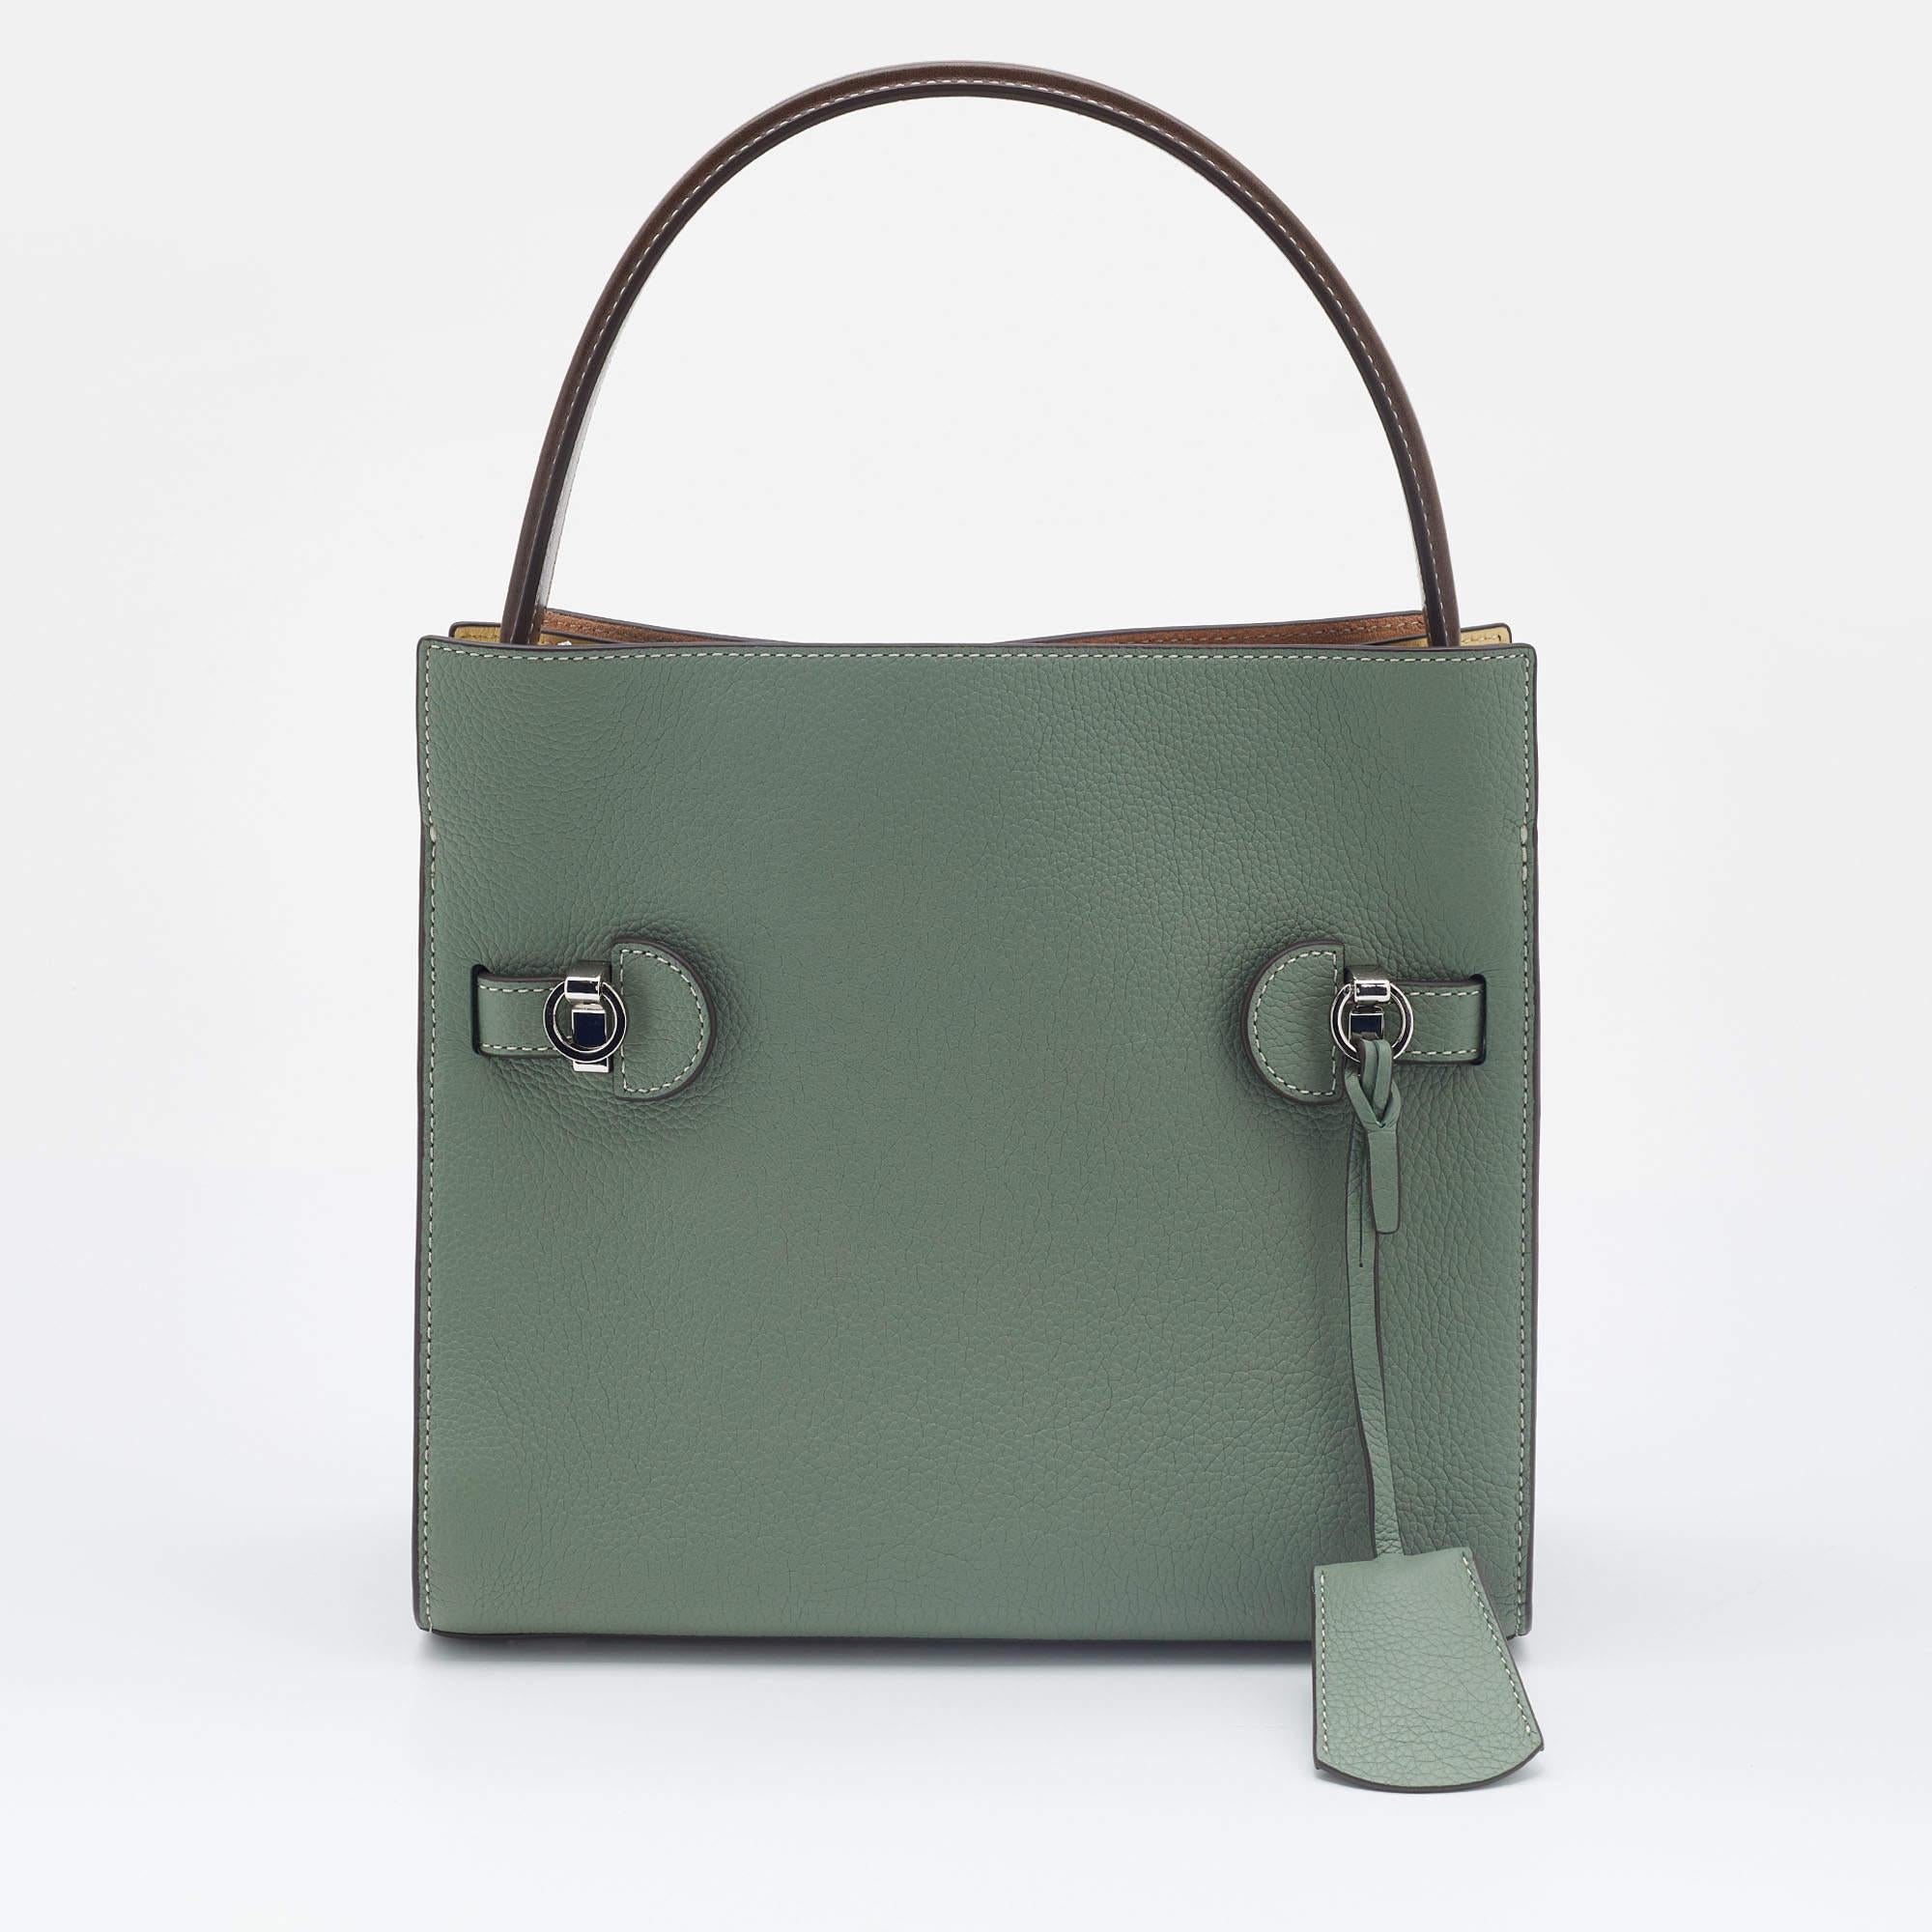 The Lee Radziwill bag is named after a woman admired by Tory. This here is constructed using leather-suede and fitted with a signature lock in silver-tone hardware. A shapely handle is attached to the top and an optional shoulder strap is offered